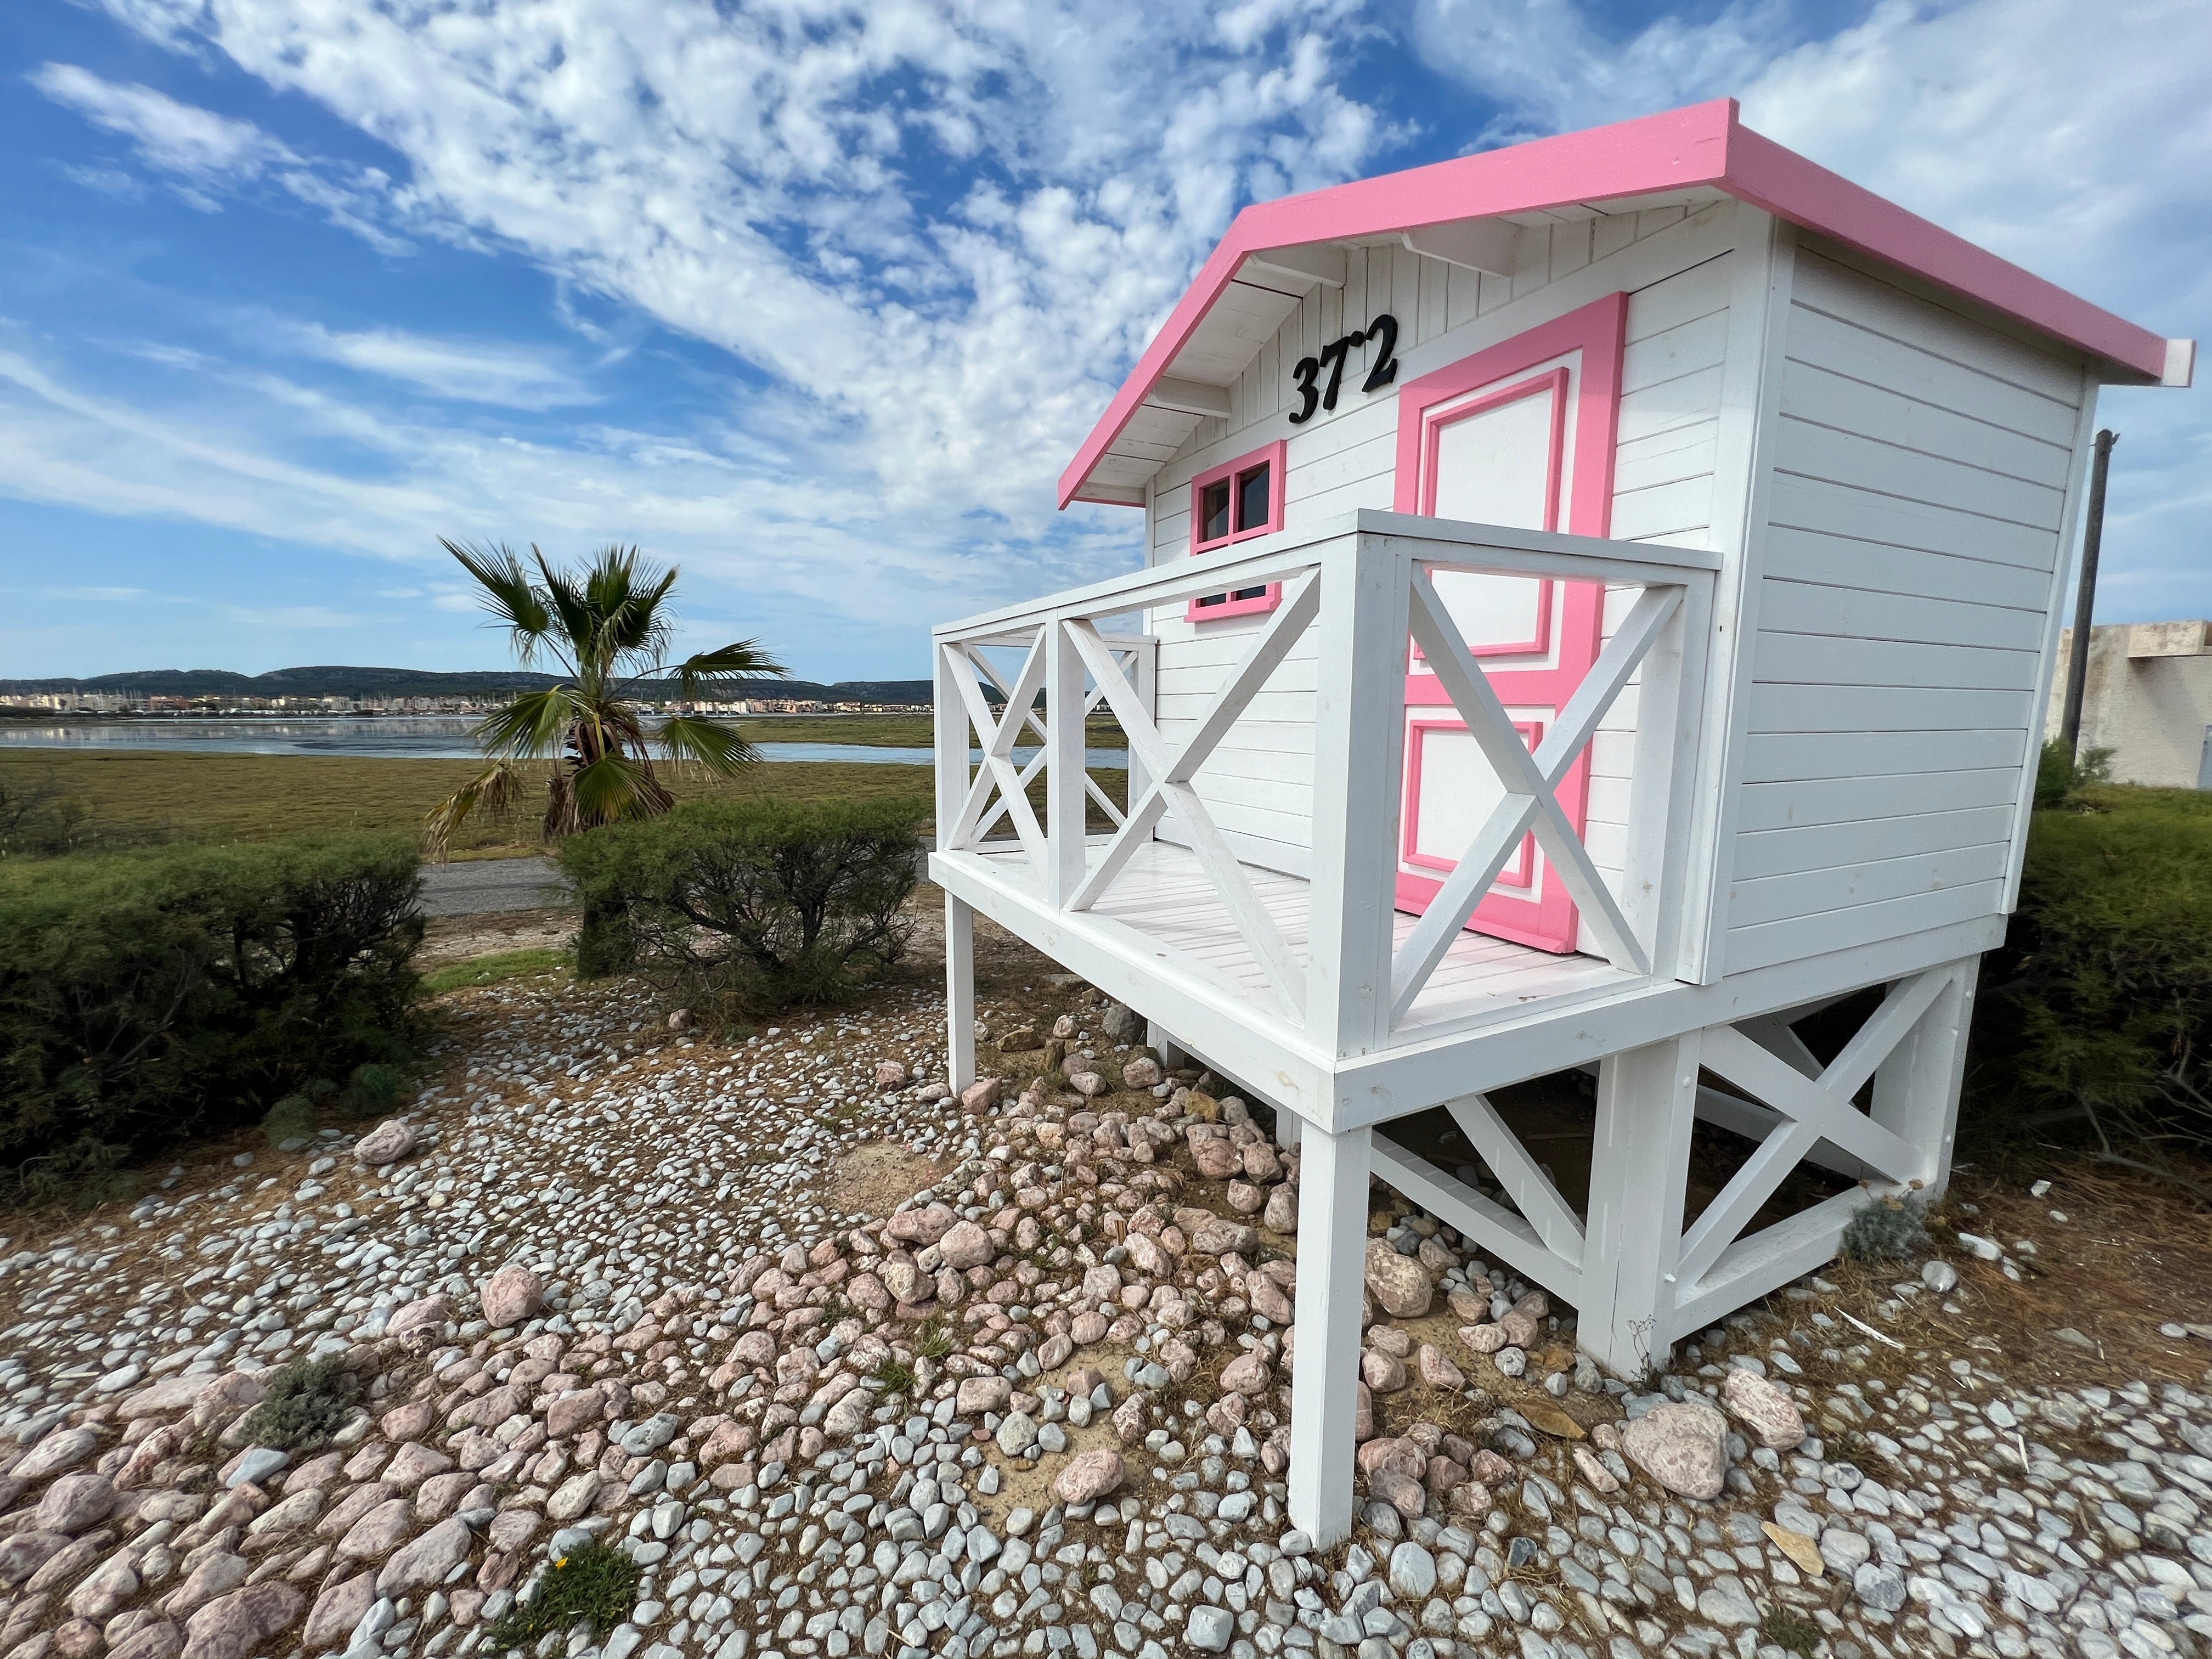 Welcome to Gruissan, twinned with Barbieland: the chalet that greets arrivals to the beach area